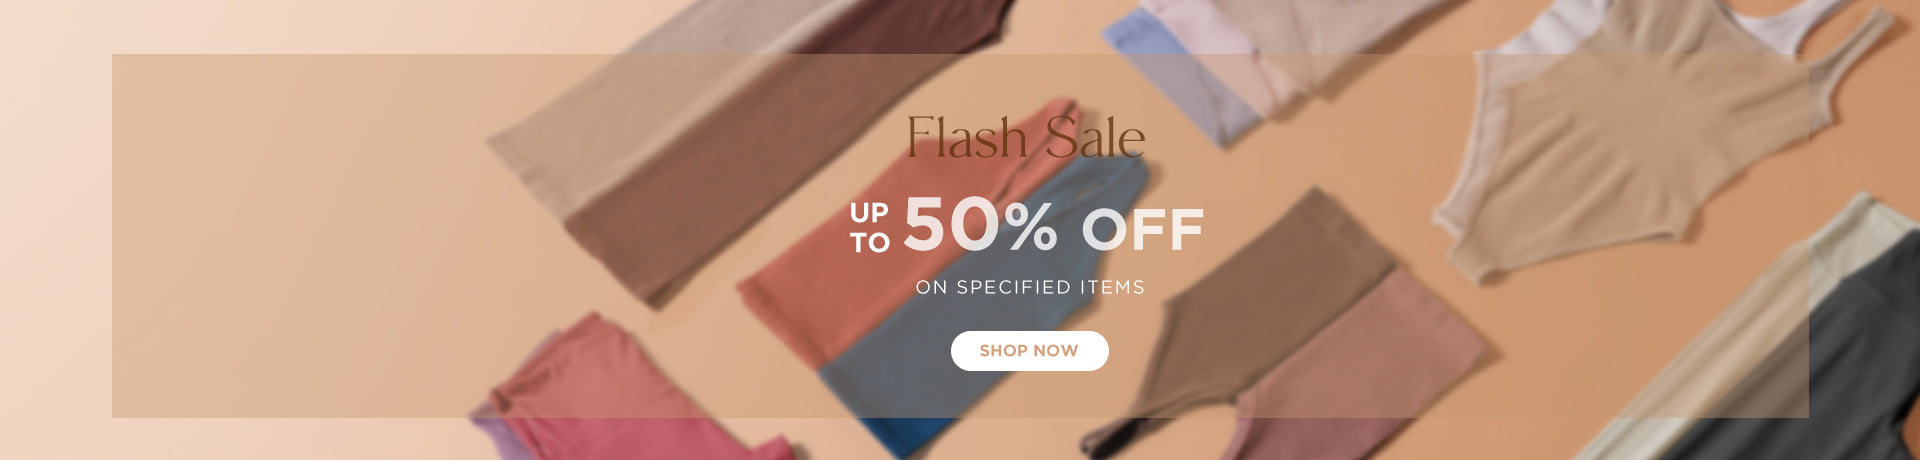 ODODOS Flash Sale up to 50% off on specified items